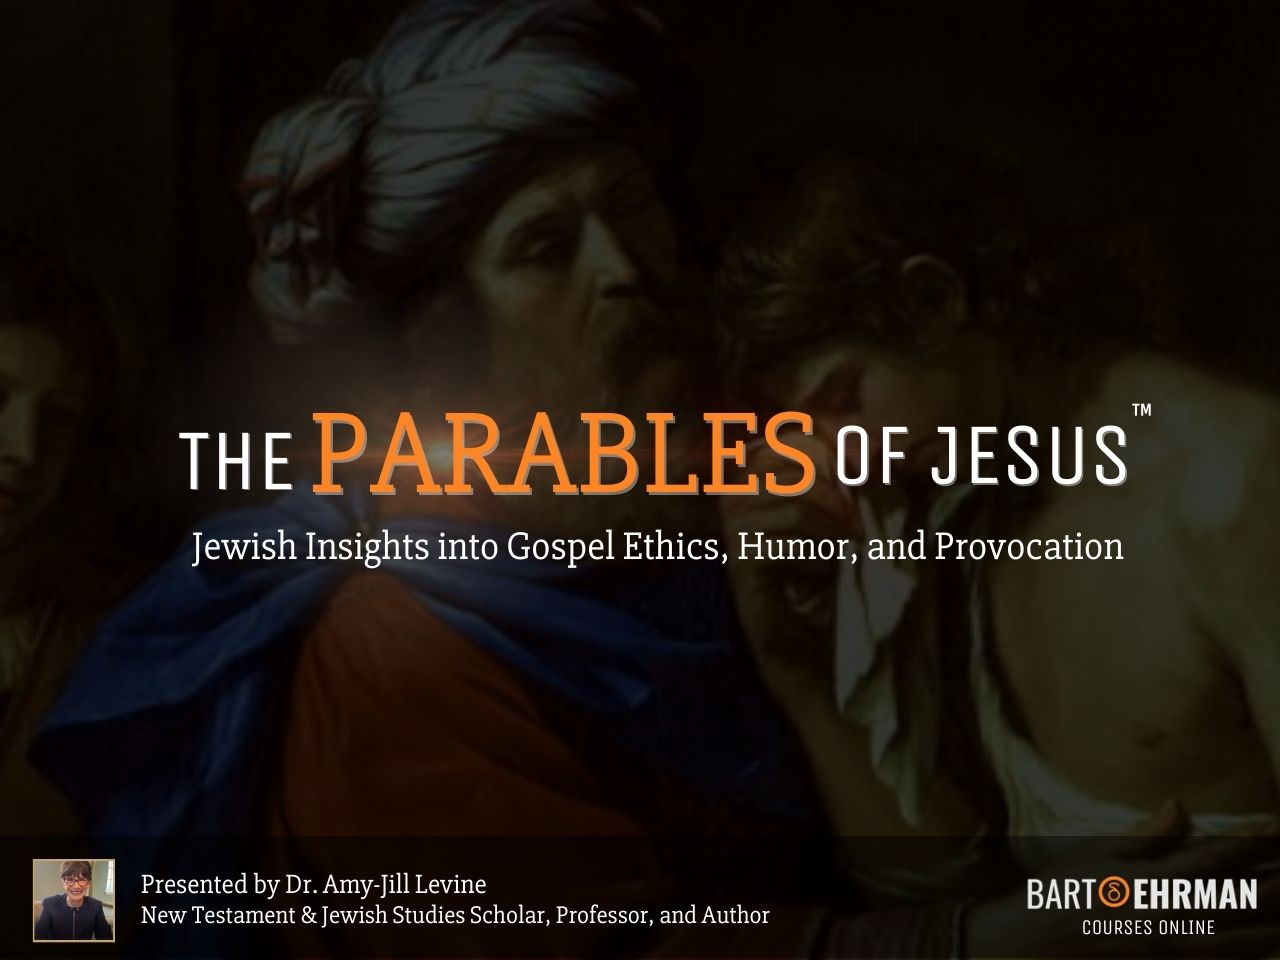 The Parables of Jesus Online Course